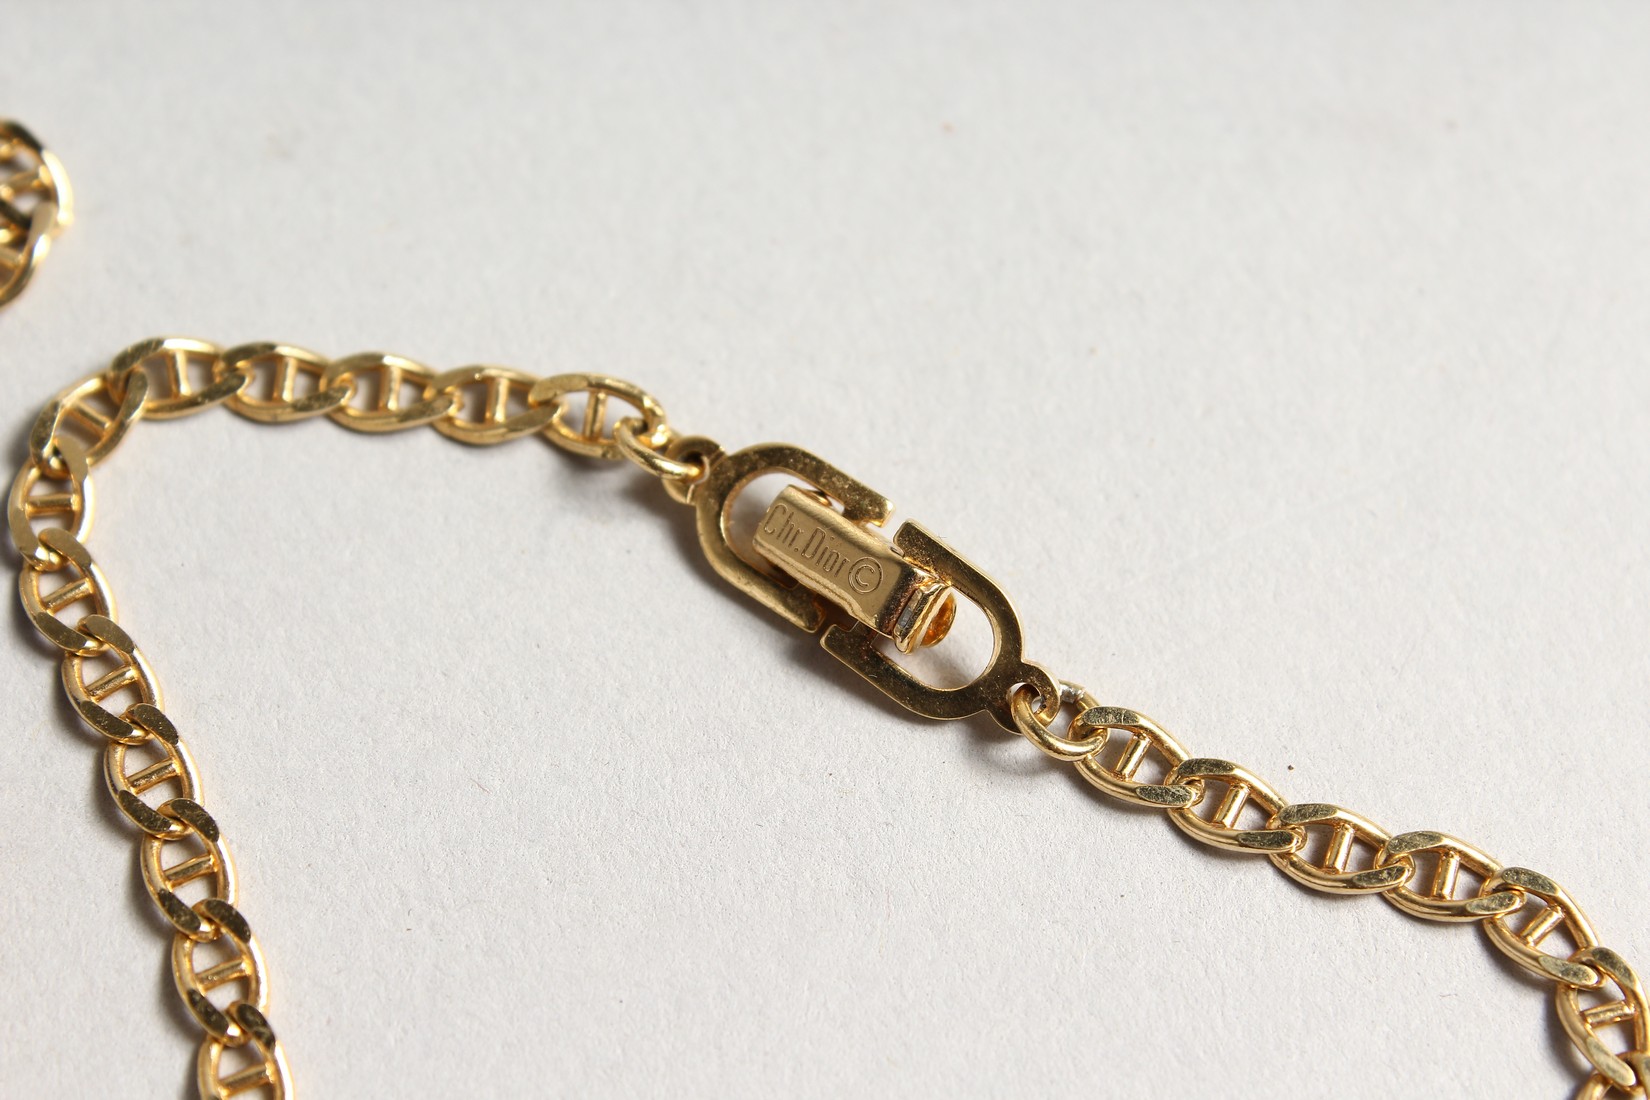 A CHRISTIAN DIOR 1980'S GILT AND LAPIS NECKLACE in a Christian Dior box. - Image 3 of 4